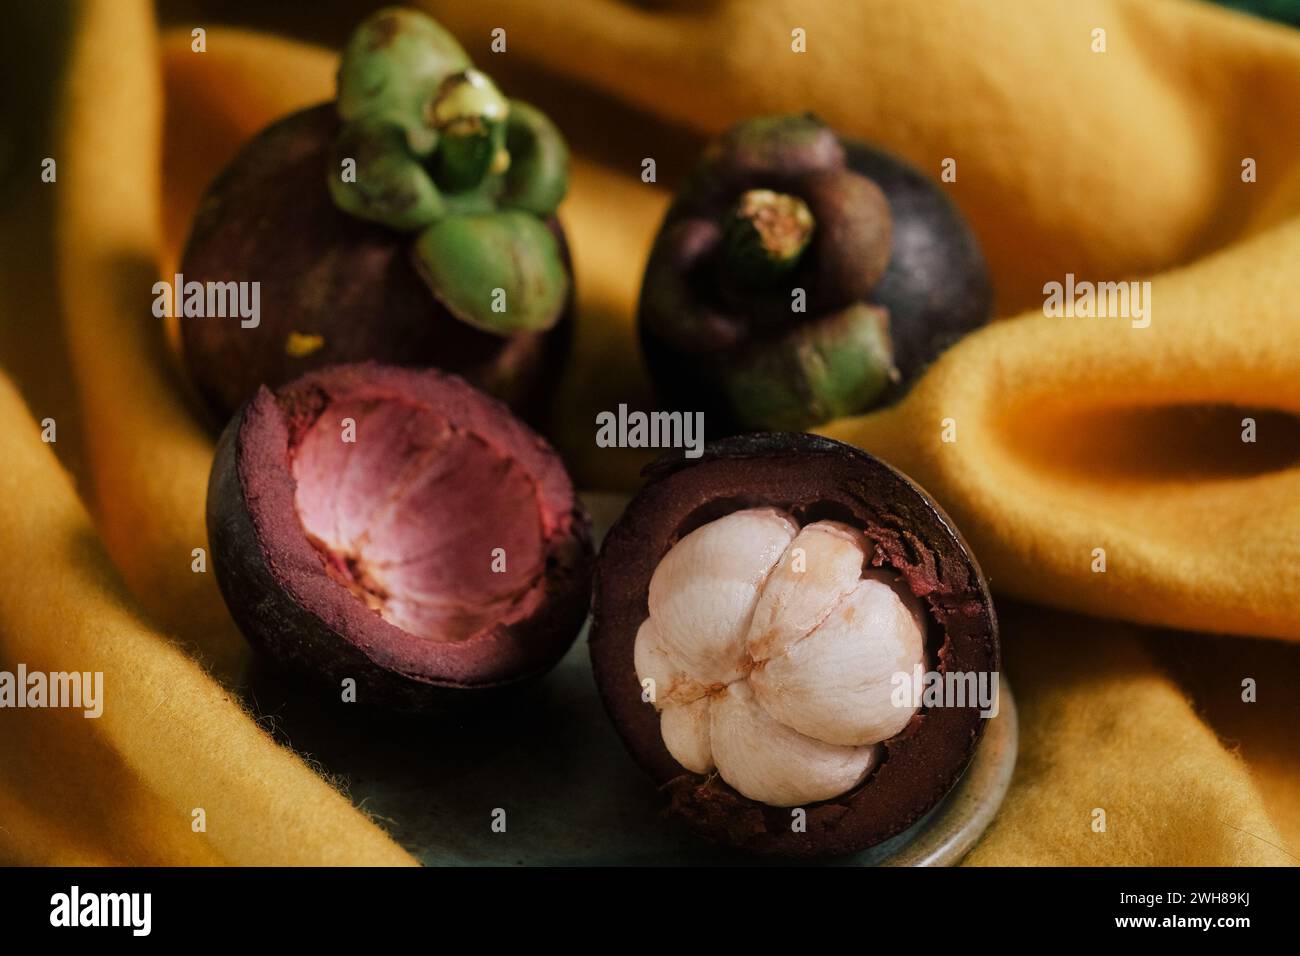 Lush still-life set up with yellow cloth, vines, a glass of water, and three purple Mangosteens, one cut open in half. Close-up of sweet tropical fruit. Stock Photo